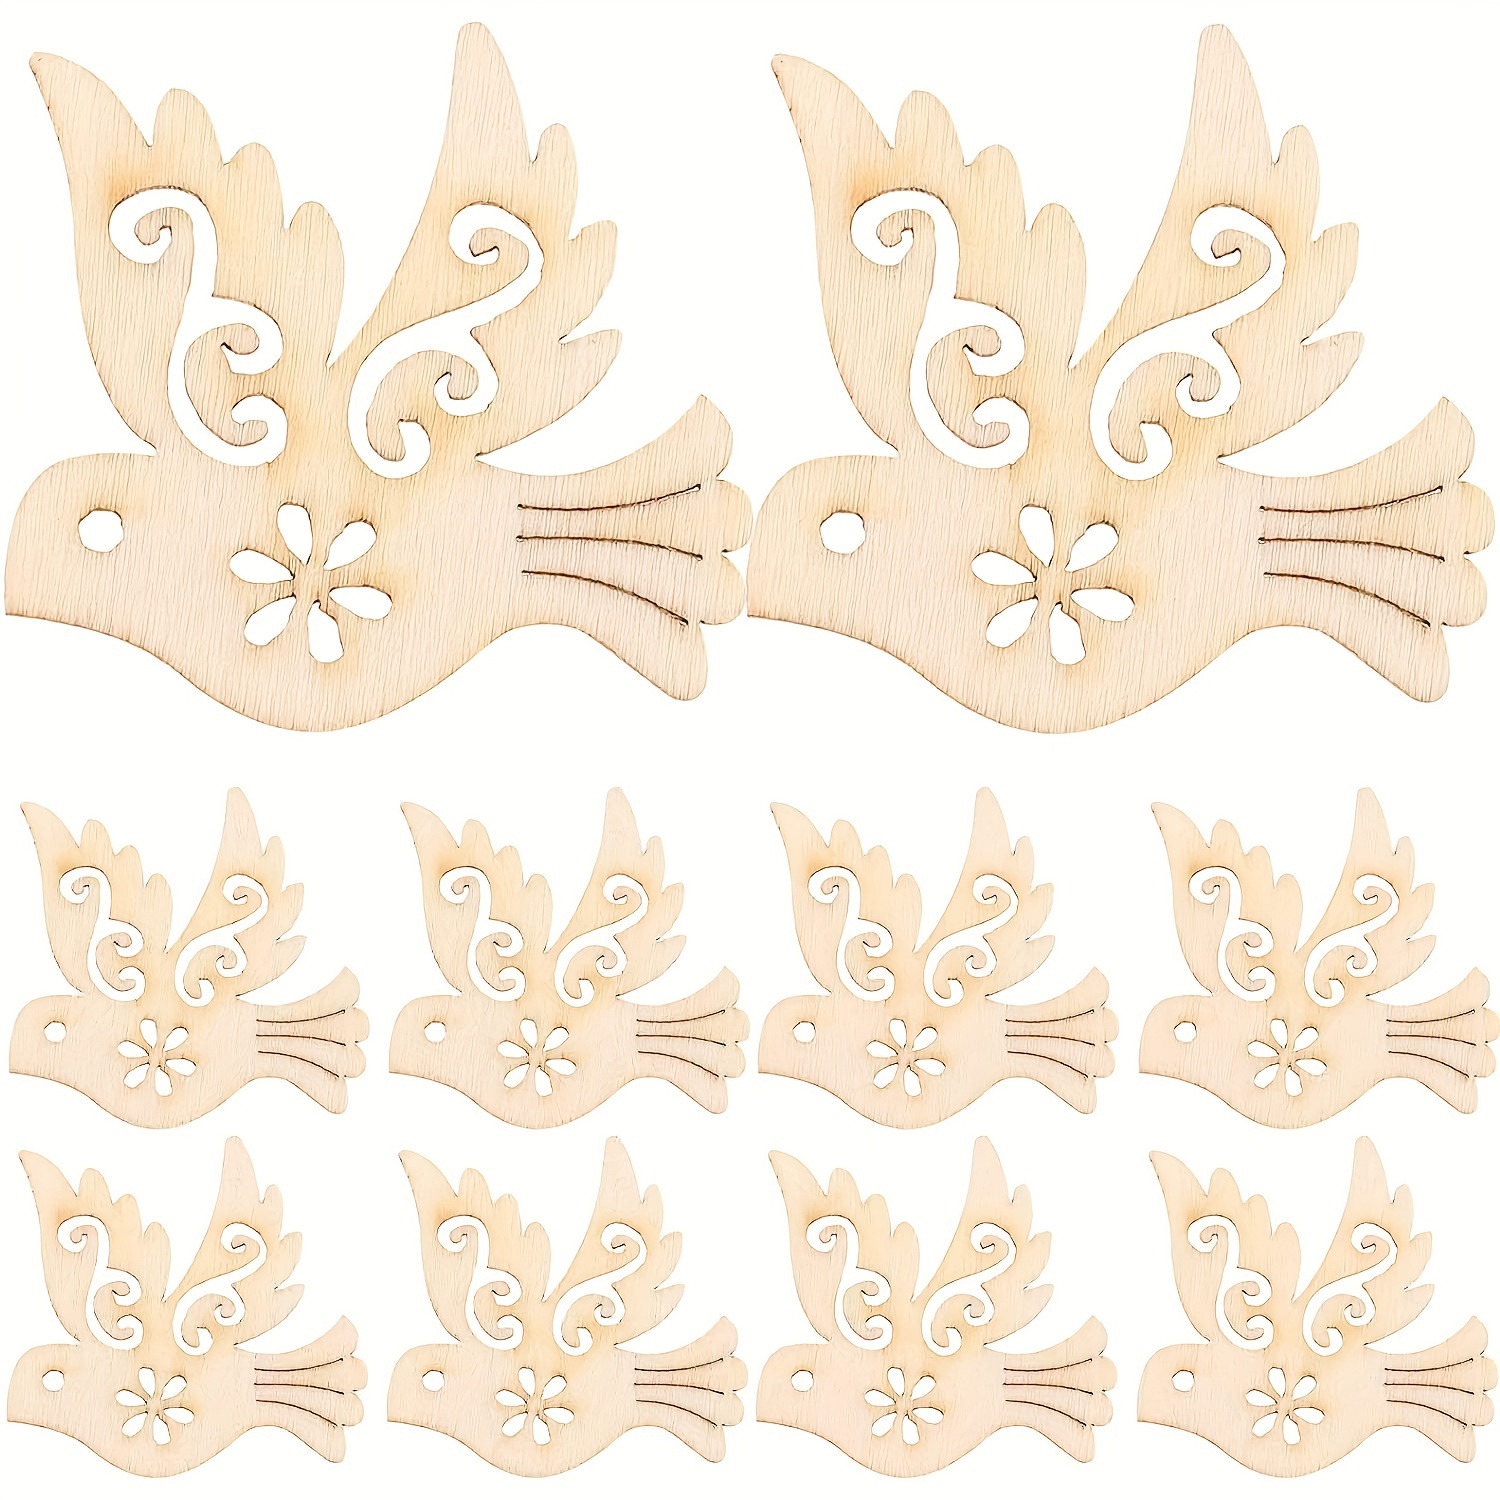 Wood Floral Cut Out, Flower Shapes, Wooden Floral Pattern for Wood Signs,  Wood Flowery Cutout, Wood Blanks Shapes for Crafts, Unfinished DIY 